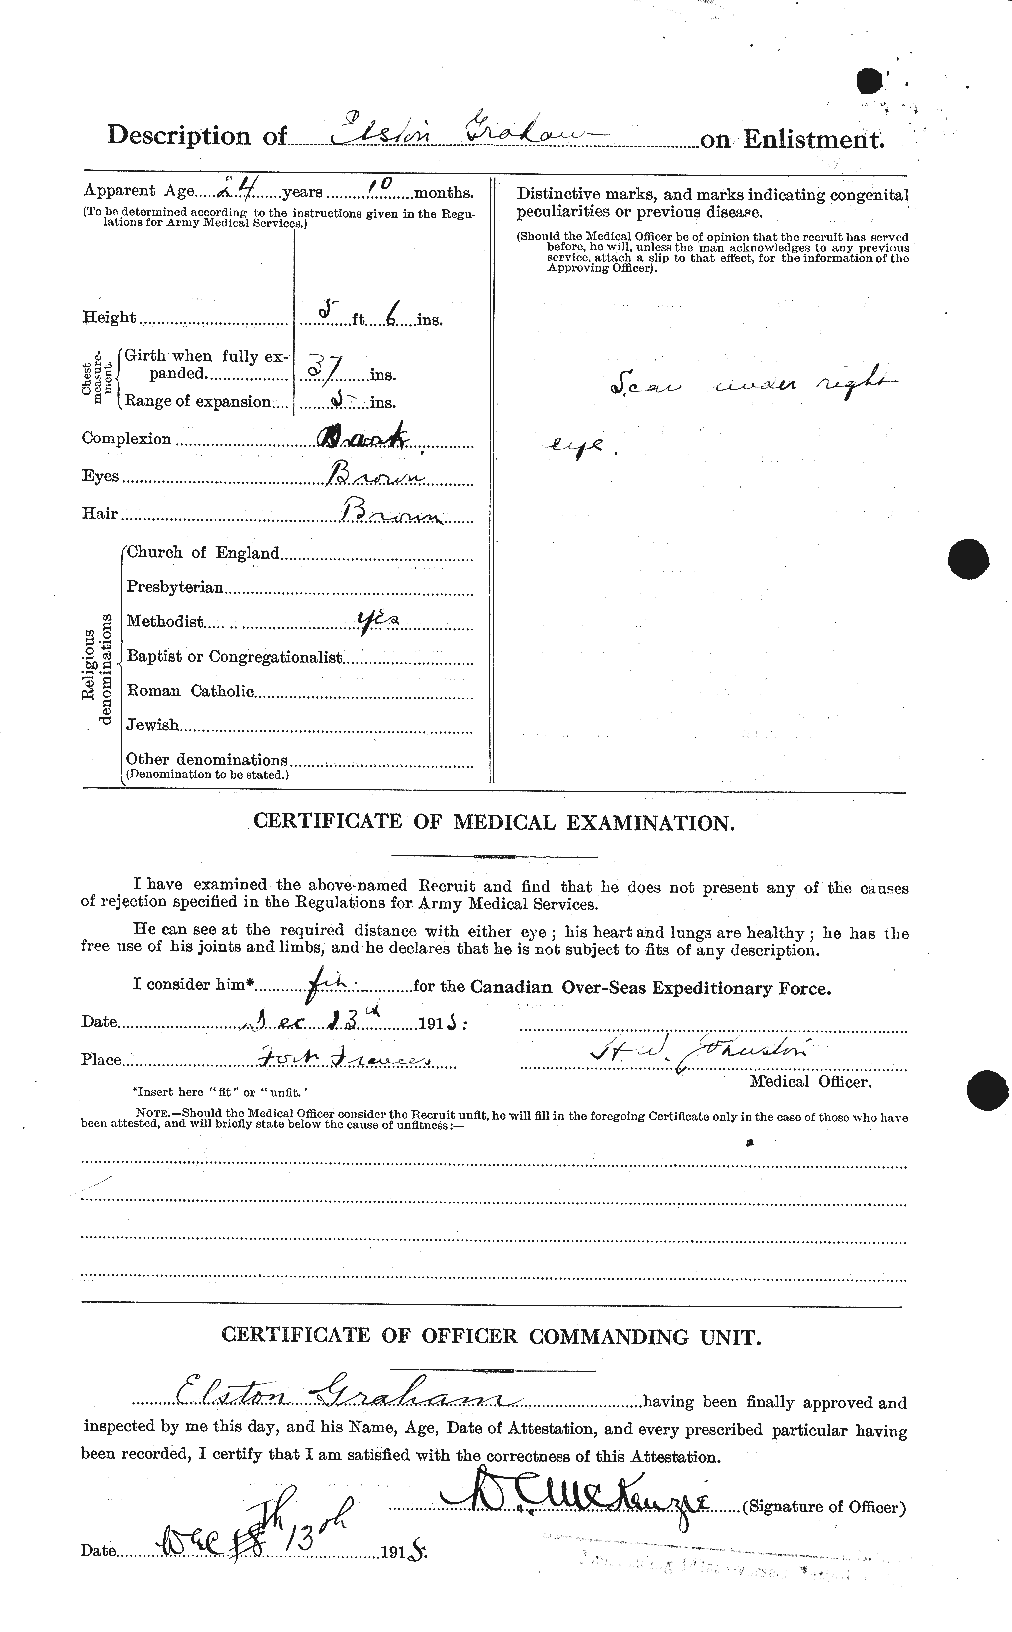 Personnel Records of the First World War - CEF 357550b